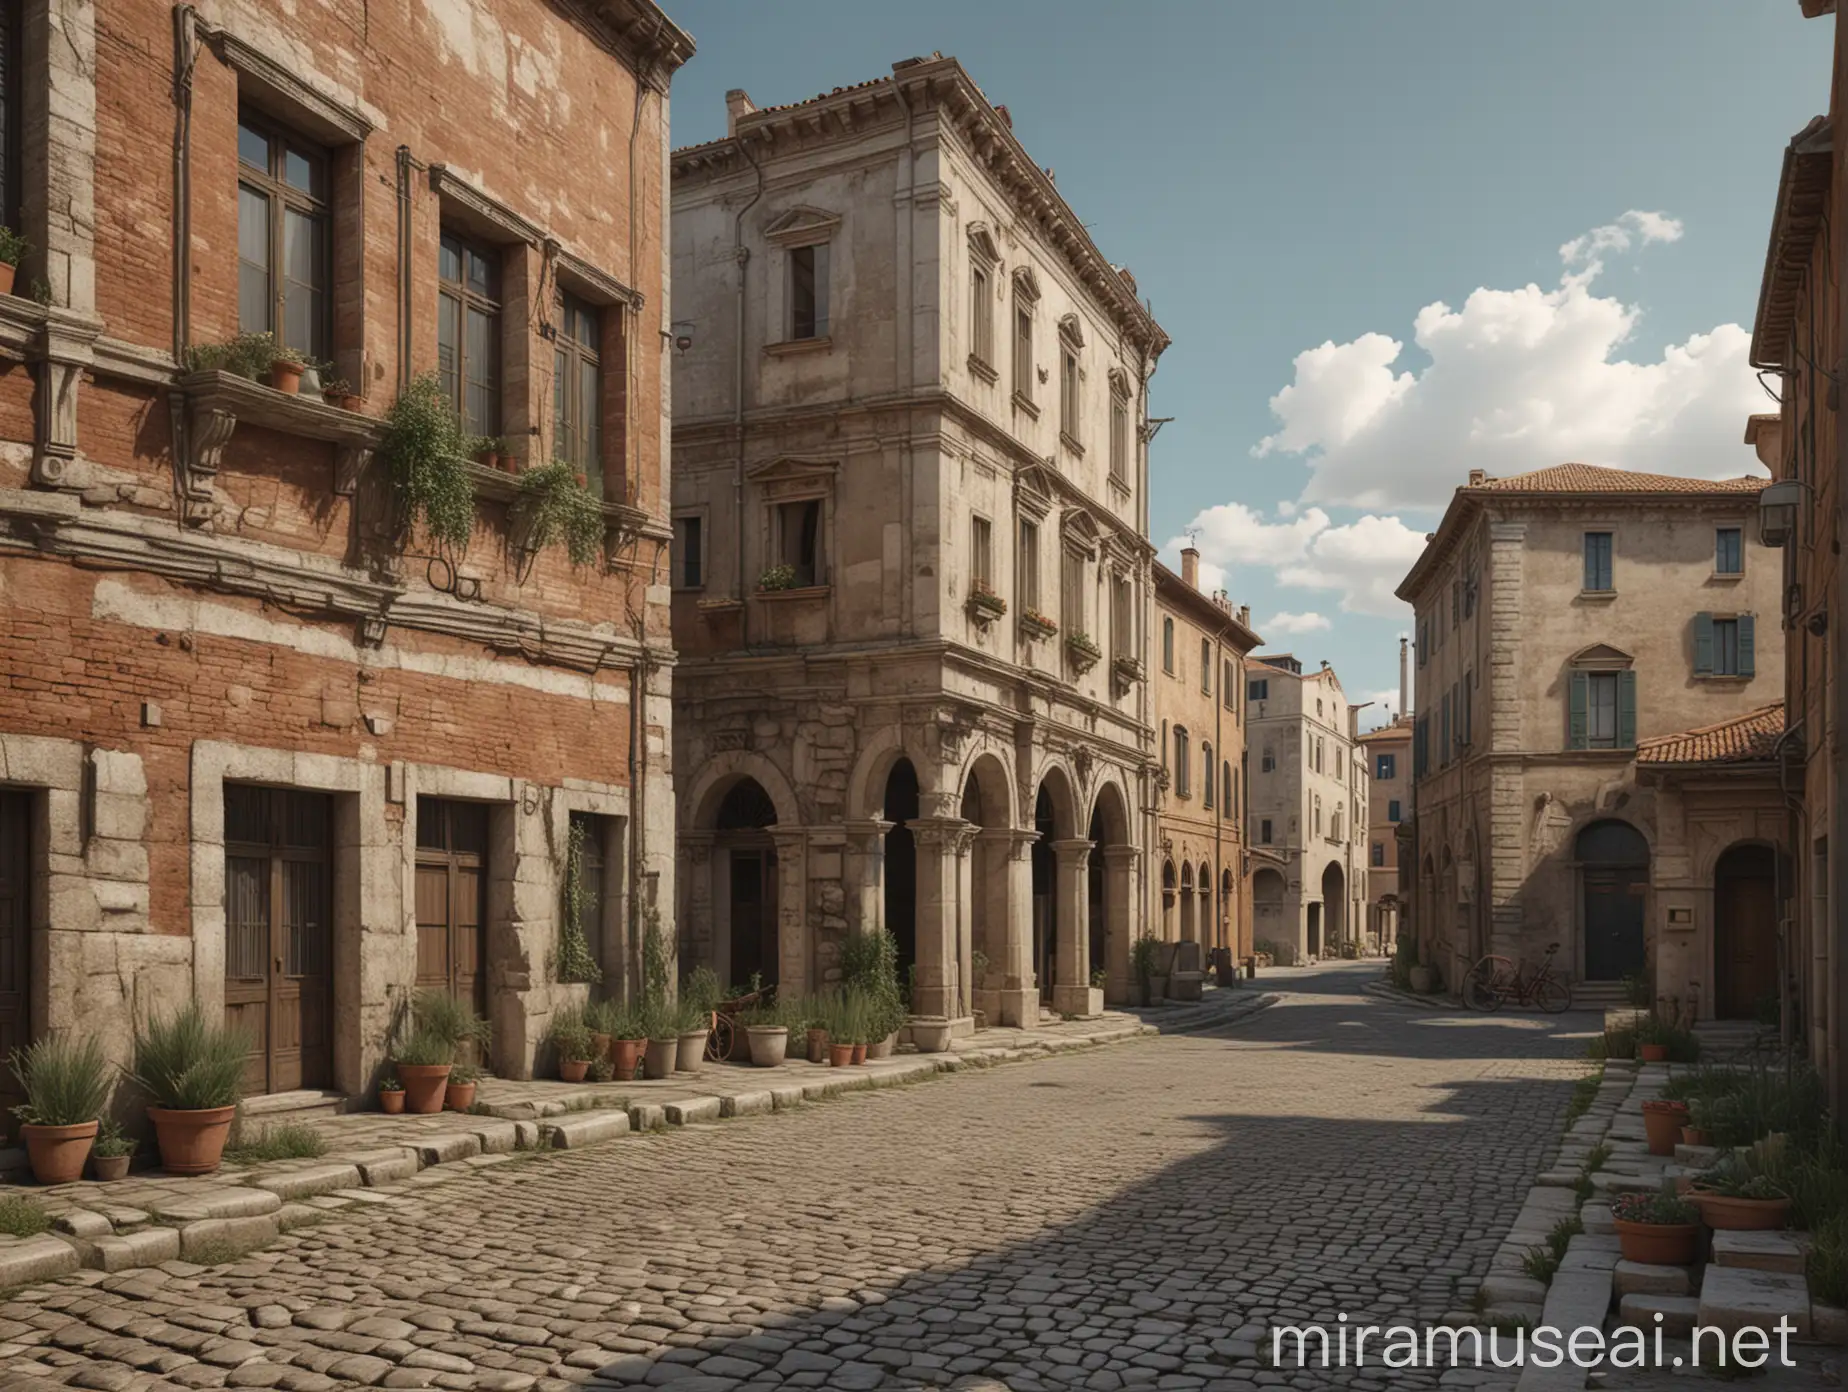 generate an image of a landscape with 4 modern roman-style buildings seen from the front and a little street in front of them